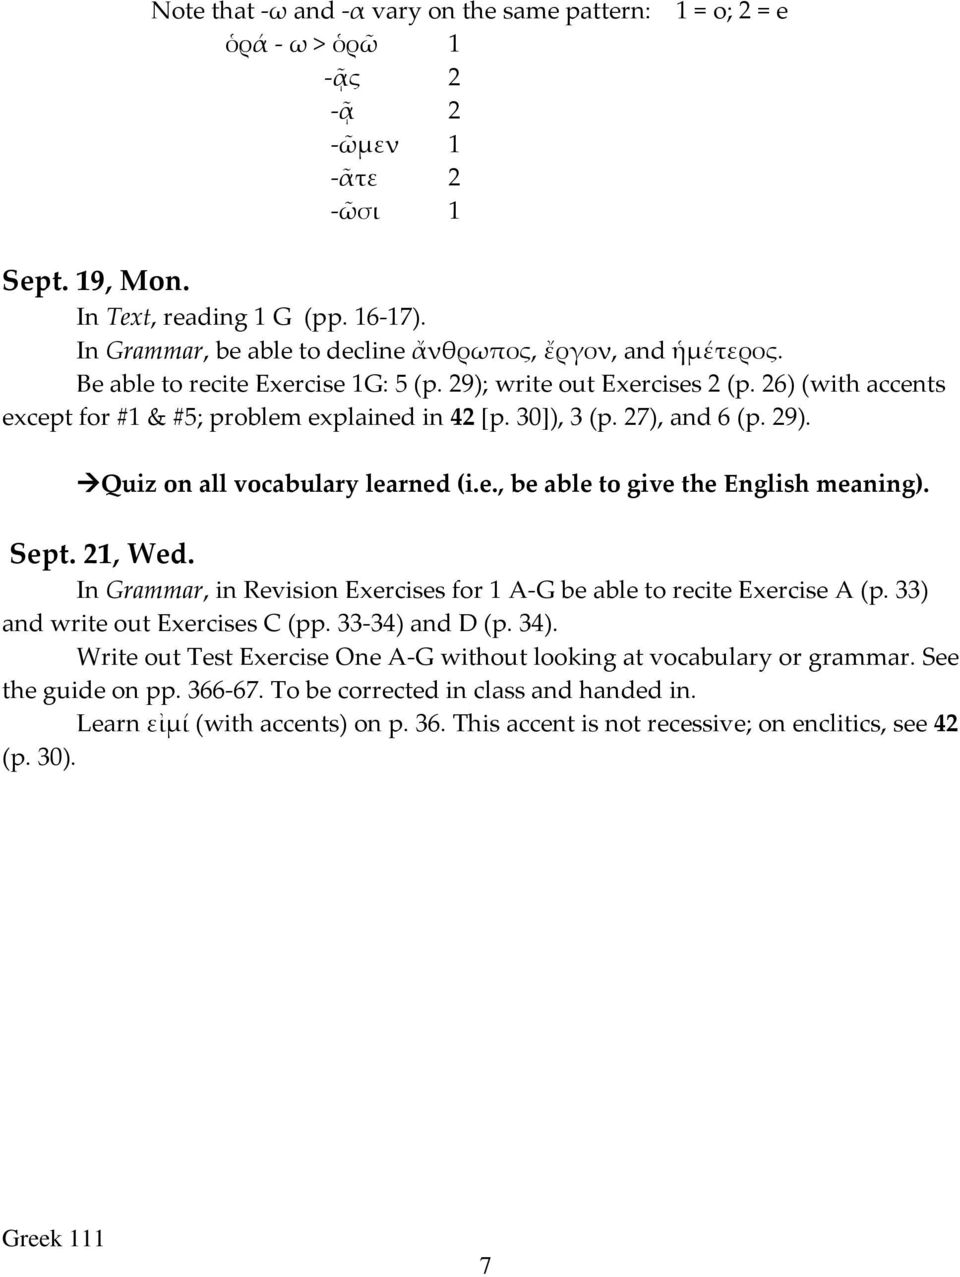 30]), 3 (p. 27), and 6 (p. 29). Quiz on all vocabulary learned (i.e., be able to give the English meaning). Sept. 21, Wed. In Grammar, in Revision Exercises for 1 A-G be able to recite Exercise A (p.